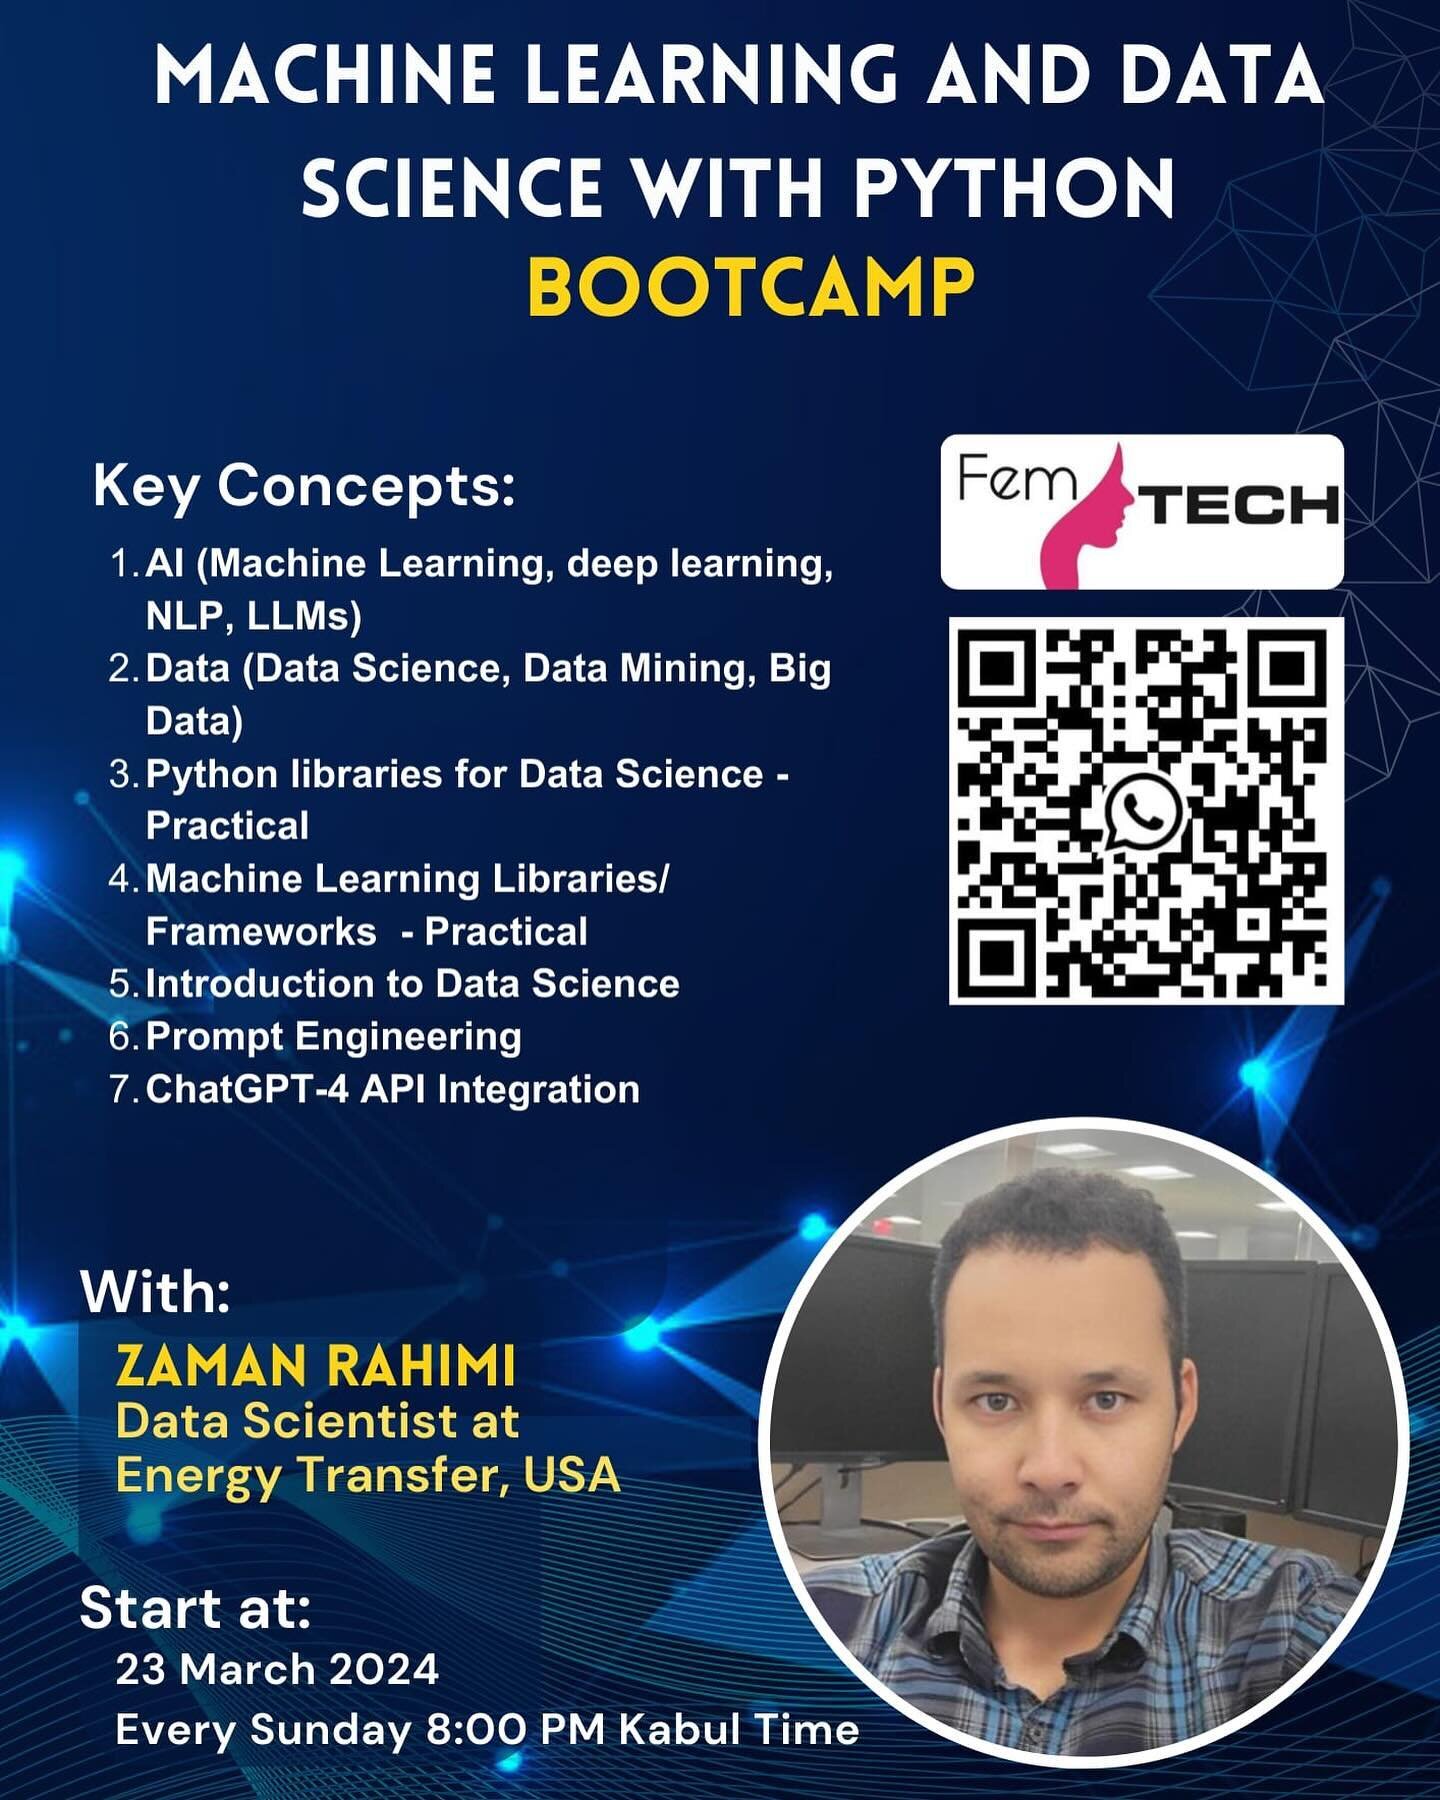 🚀 Exciting News! Join us for our upcoming 

BootCamp: Machine Learning and Data Science with Python 🐍

📅 Duration: 3 months+

🕗 Time: 8:00 PM every Sunday (Kabul time) starting from March 23rd

🔍 Prerequisite: General Python Knowledge
 (if you d